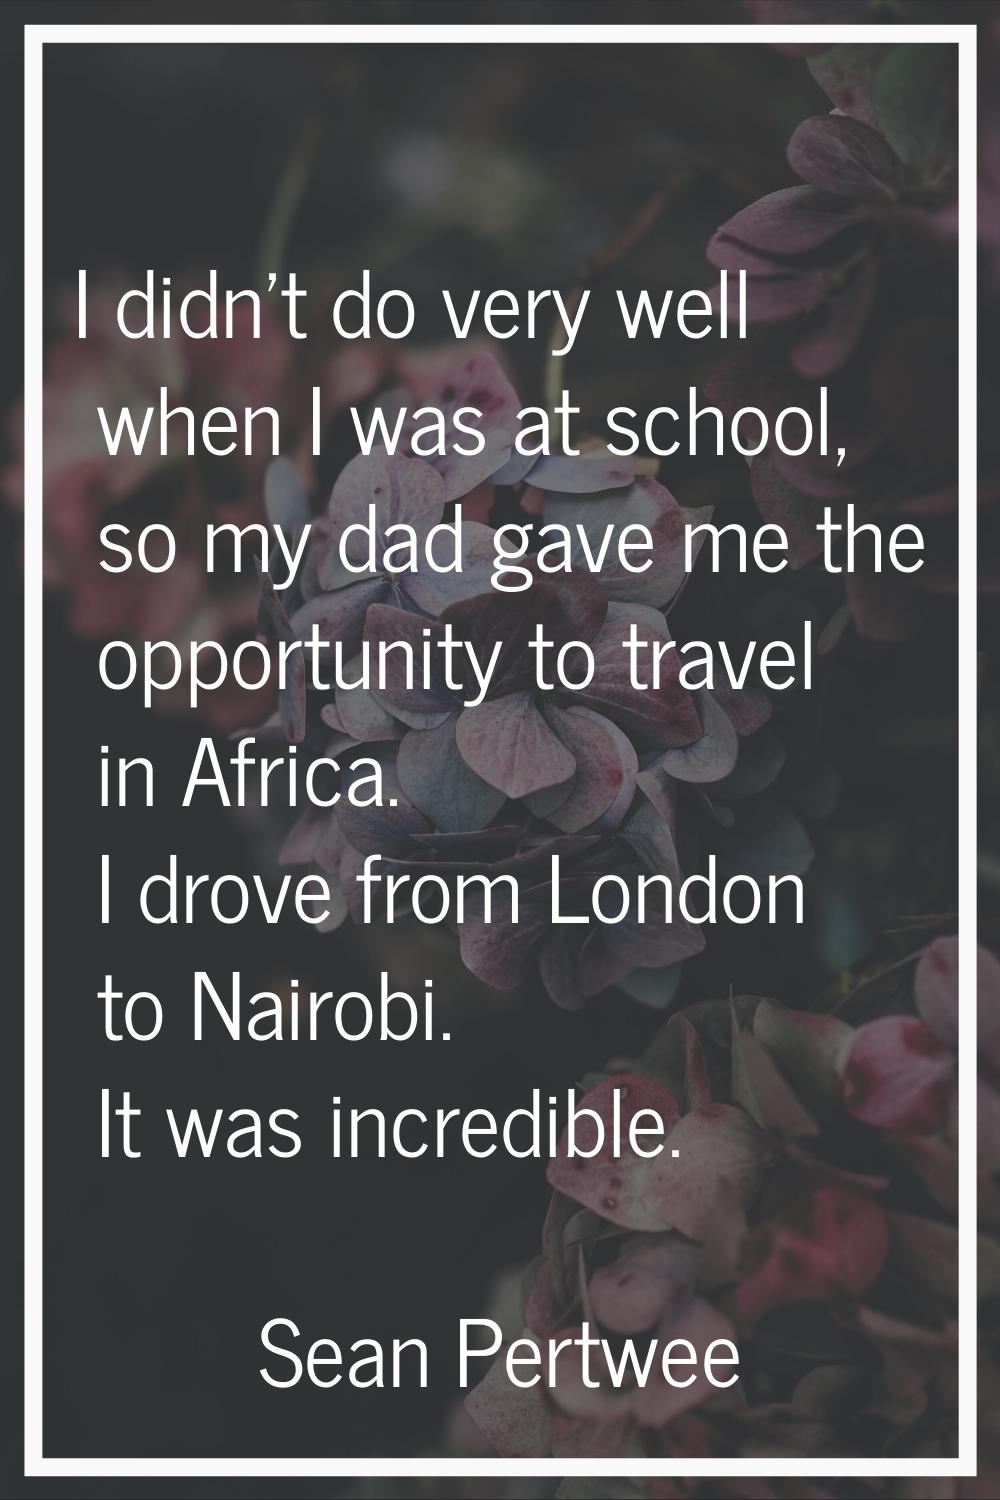 I didn't do very well when I was at school, so my dad gave me the opportunity to travel in Africa. 